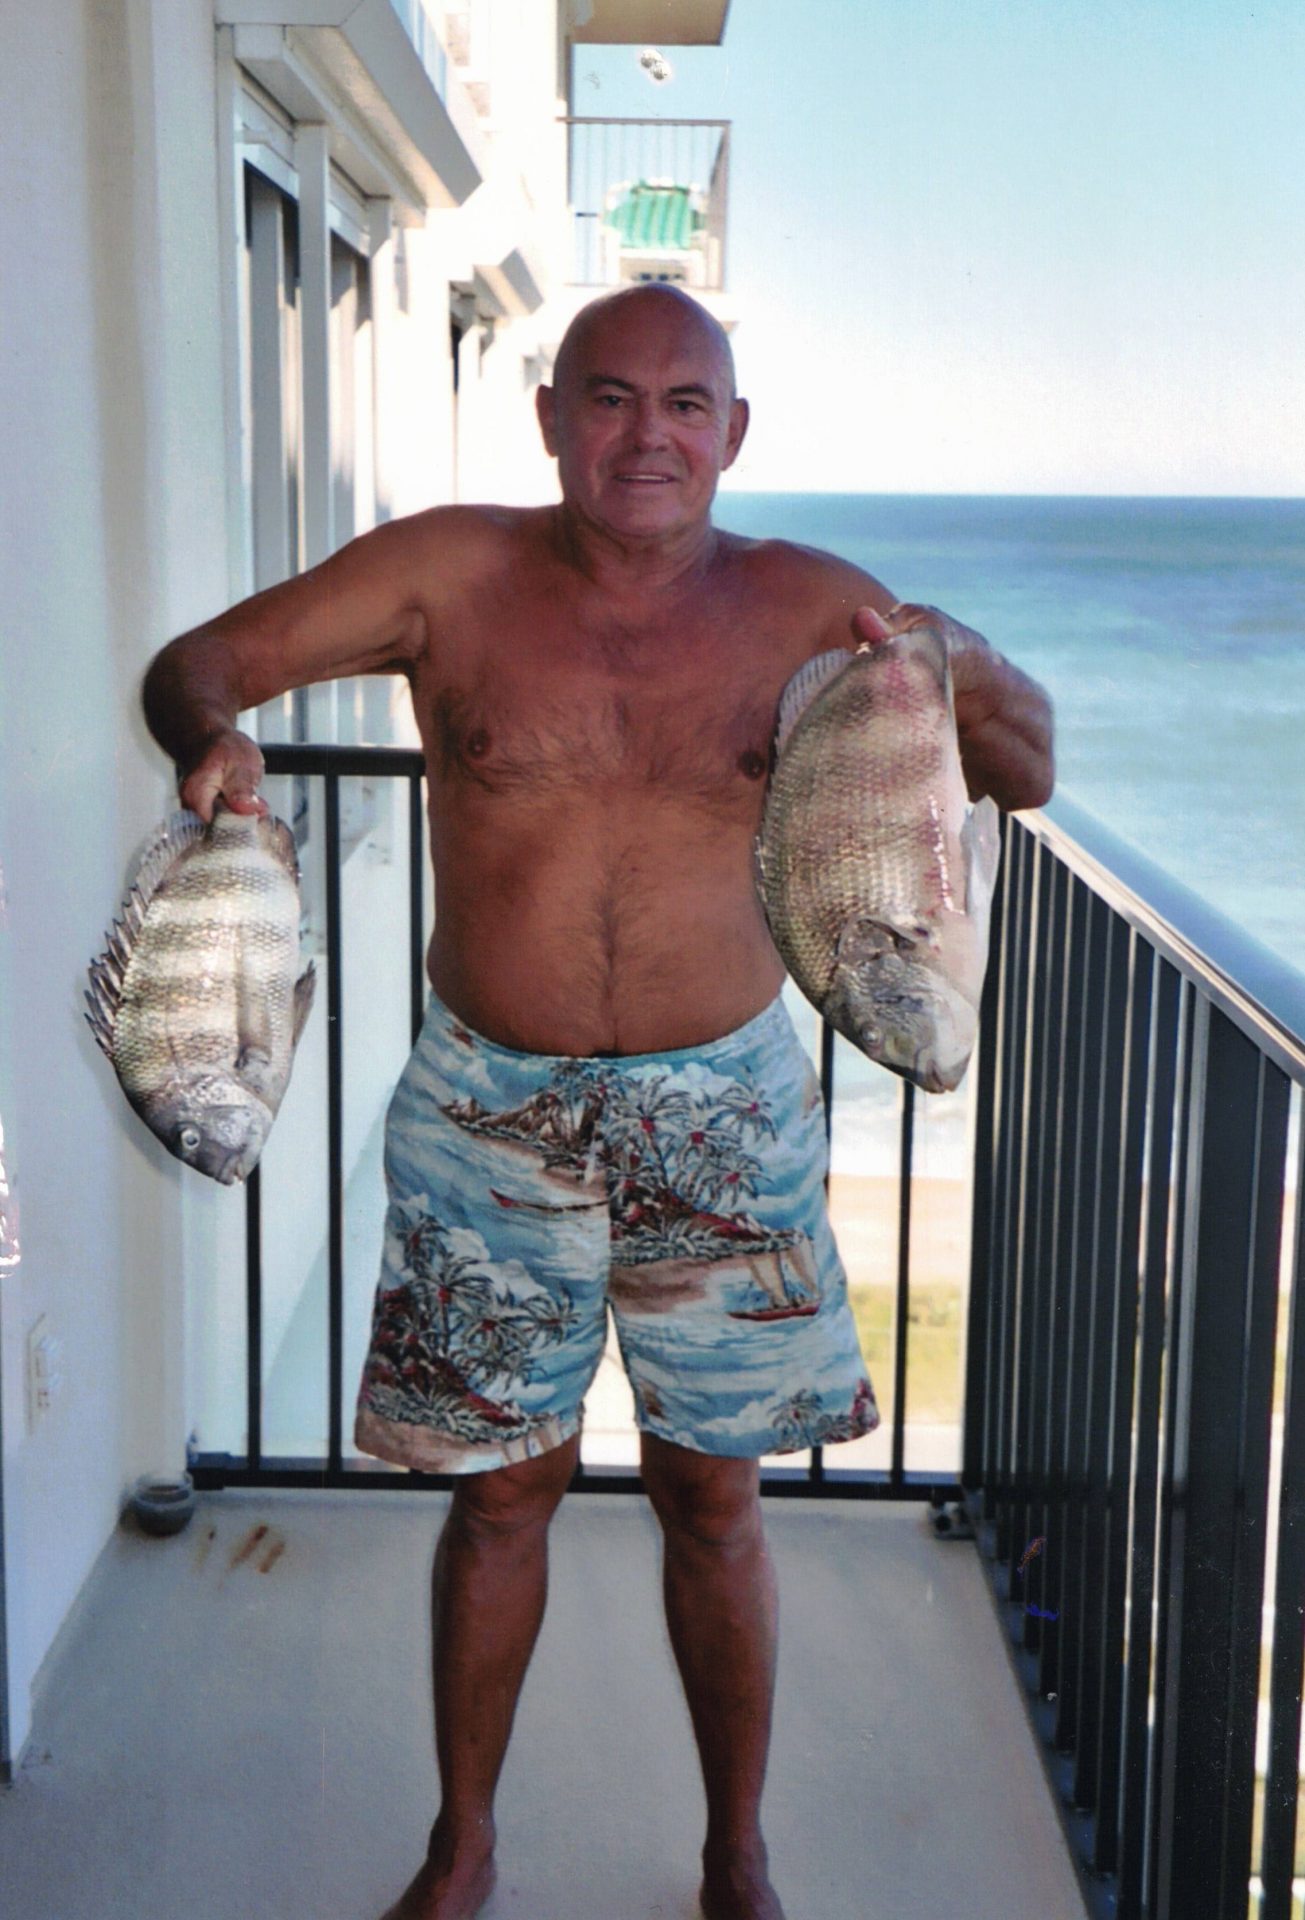 Showing off his catch in Flagler Beach. Doing what he loved.